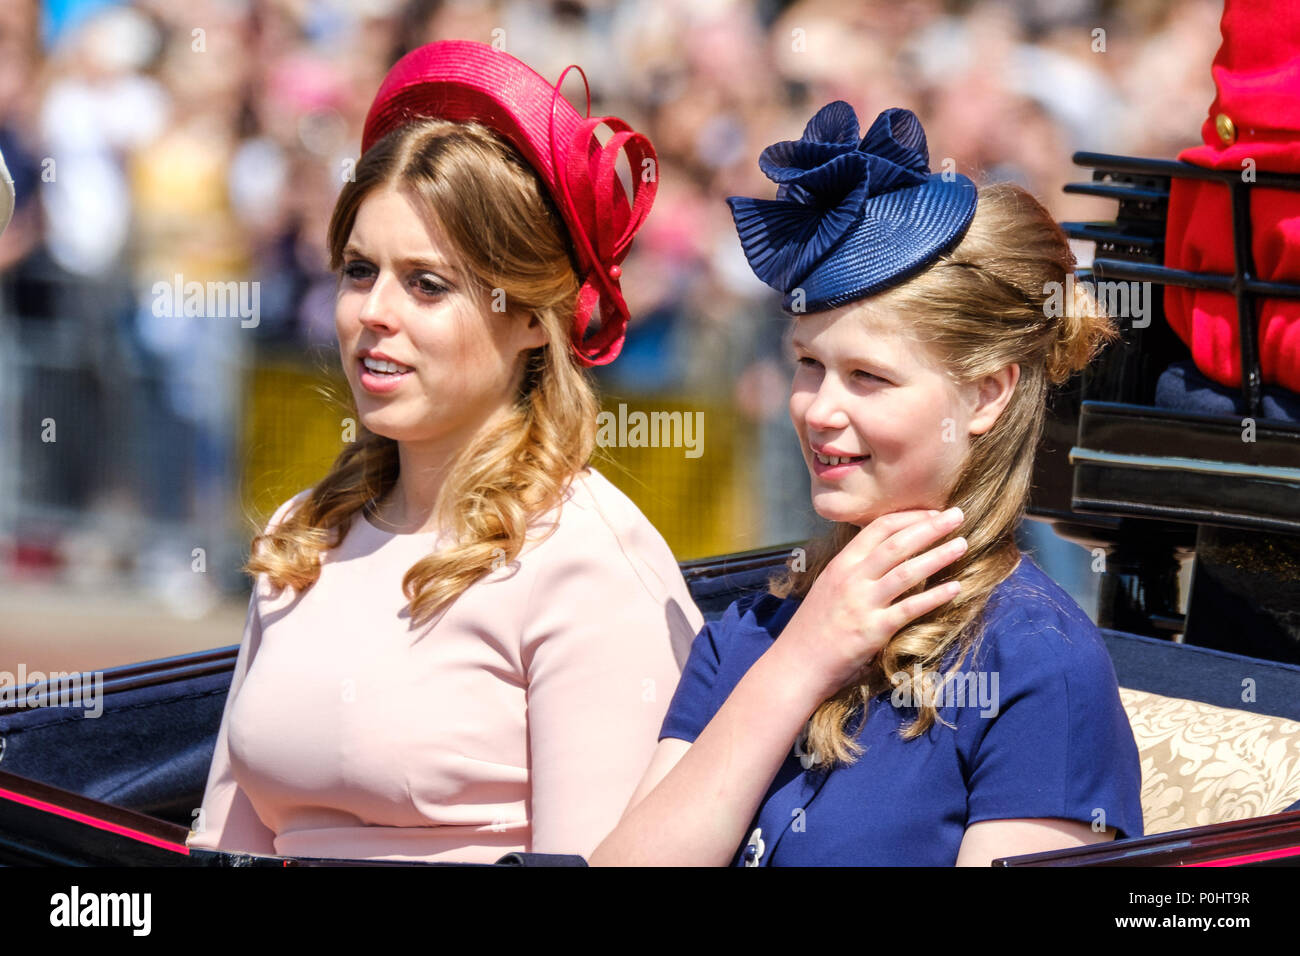 Lady Louise Windsor and Princess Beatrice at Trooping the Colour and Queens Birthday Parade on Saturday 9 June 2018 in Buckingham Palace , London. Pictured: Lady Louise Windsor , Princess Beatrice, travel from the Palace, along the Mall to Horseguards Parade where the Coldstream Guards will troop their colour. Picture by Julie Edwards. Credit: Julie Edwards/Alamy Live News Stock Photo